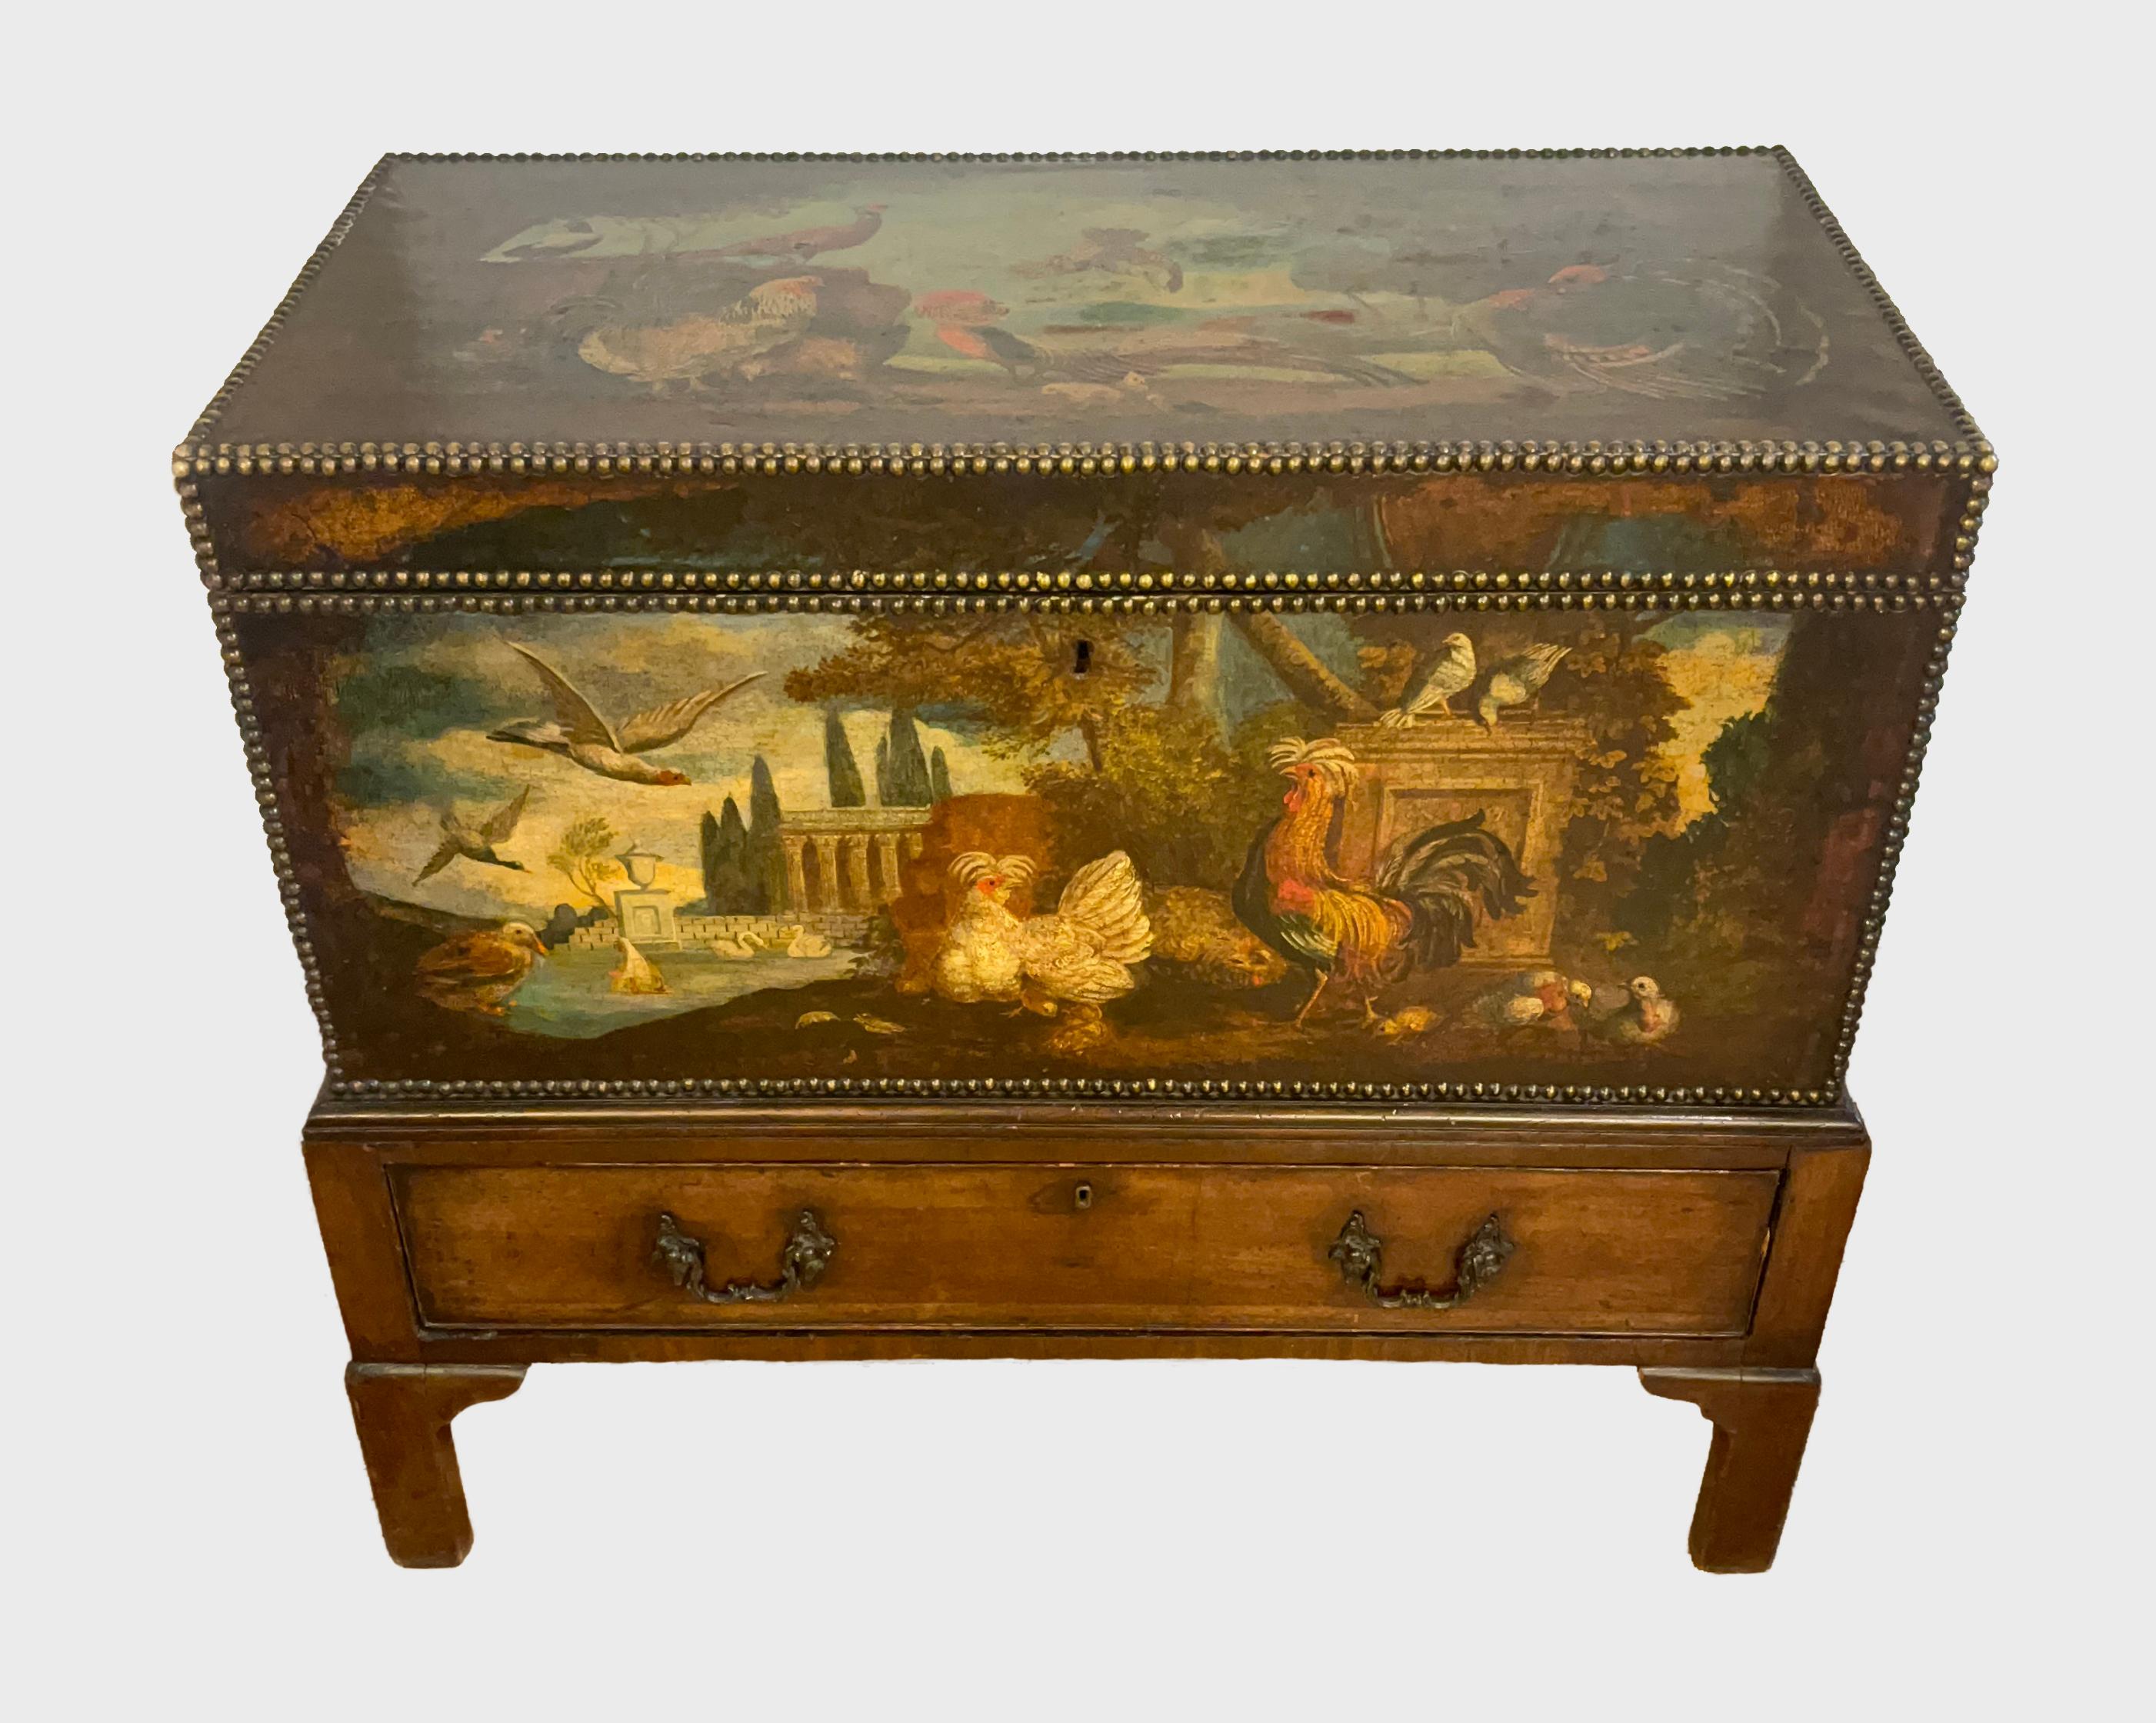 English painted leather carriage trunk on stand 18th/19th c. and adapted, the leather chest with brass close-nailed edging, painted on four sides with game foul garden setting, on mahogany stand with single long bracket feet
 